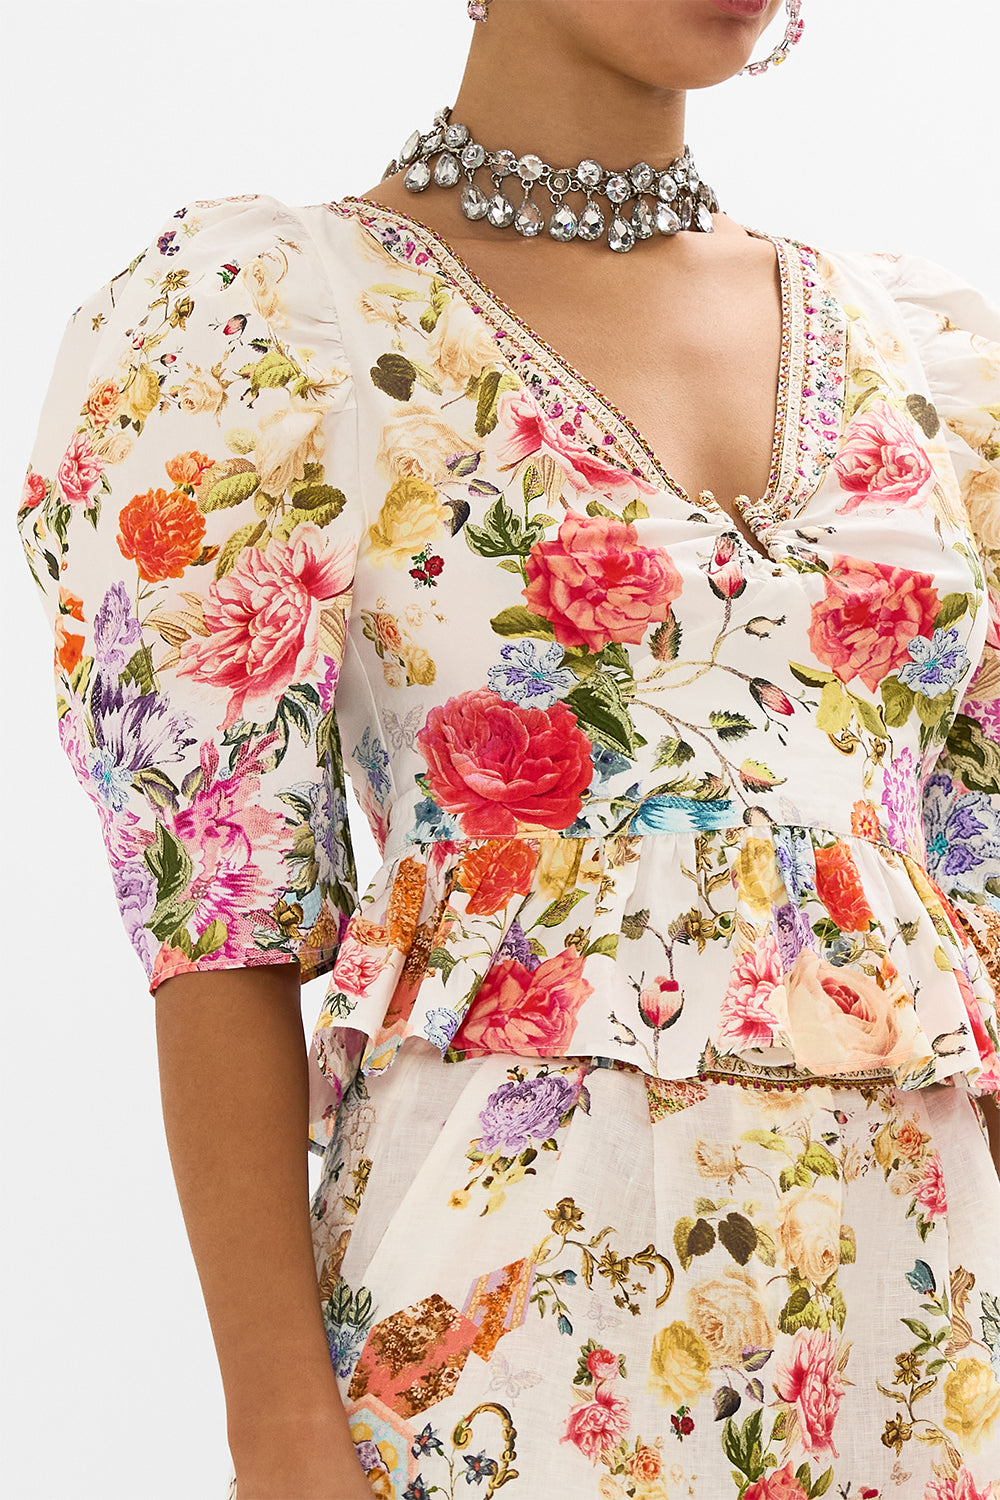 CAMILLA Floral Puff Sleeve Top with Hardware in Sew Yesterday